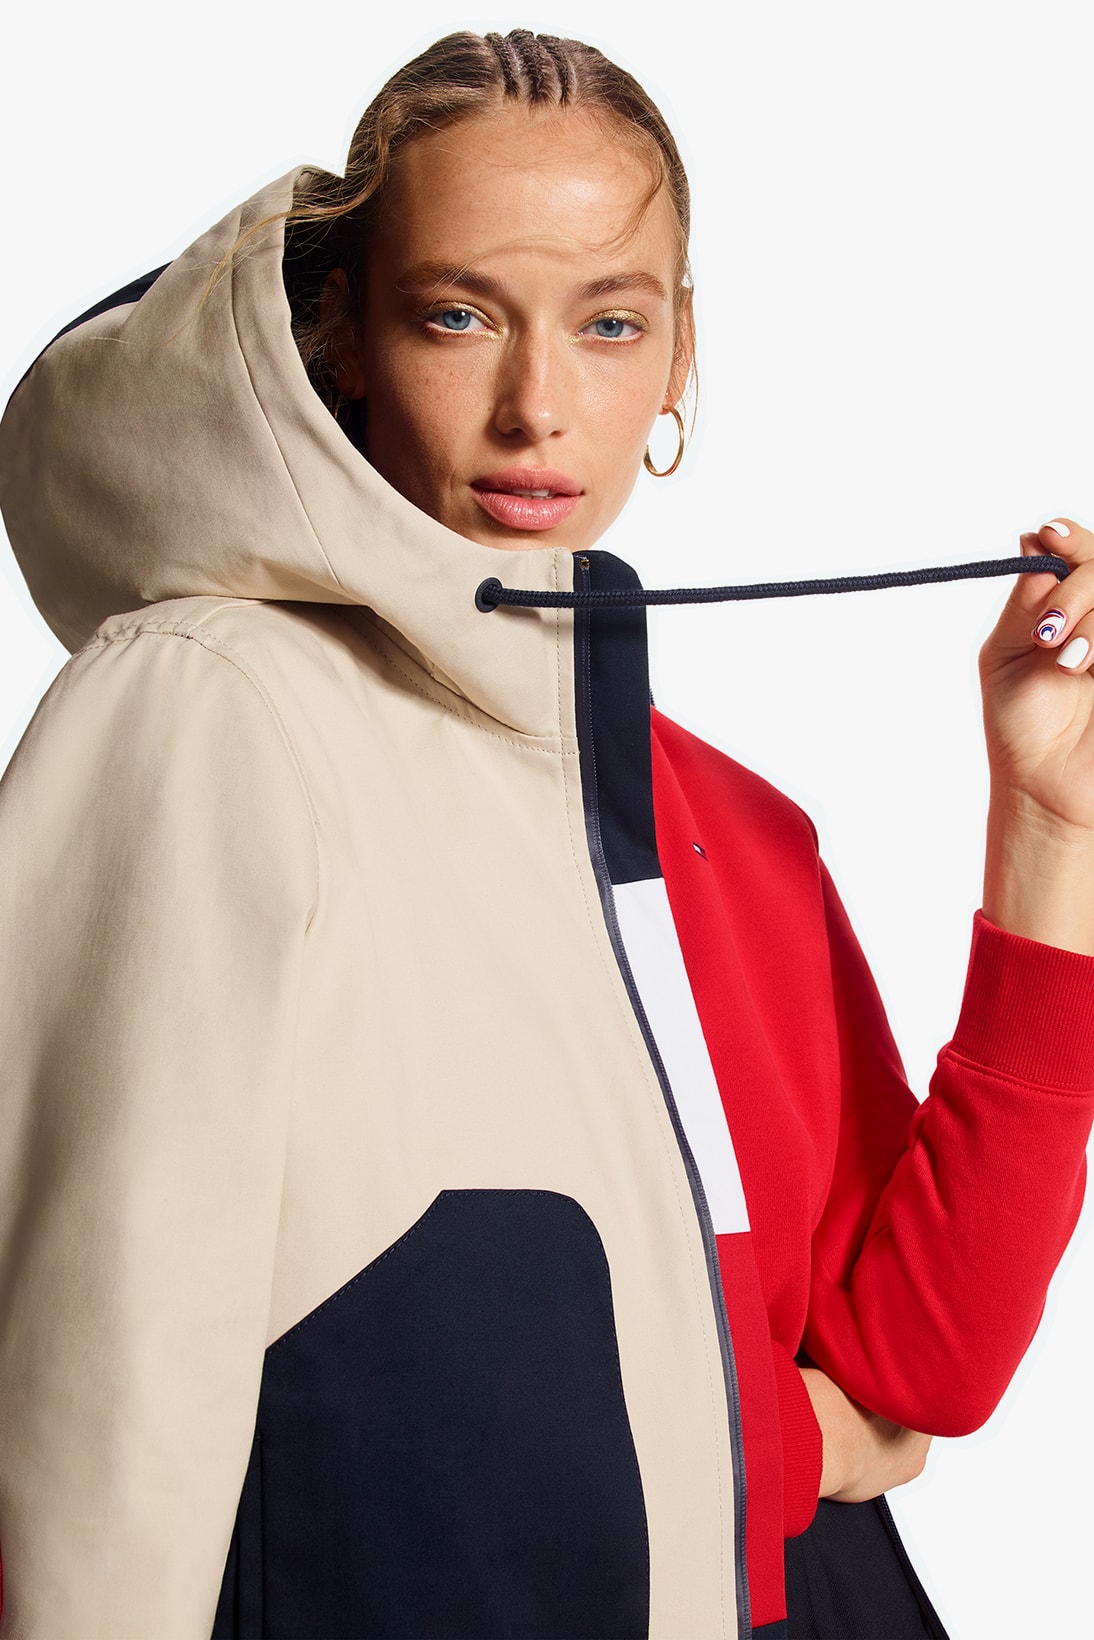 tommy Hilfigger hilfiger icons spring womens collection winnie harlow candice swanepoel campaign red white blue outerwear jackets